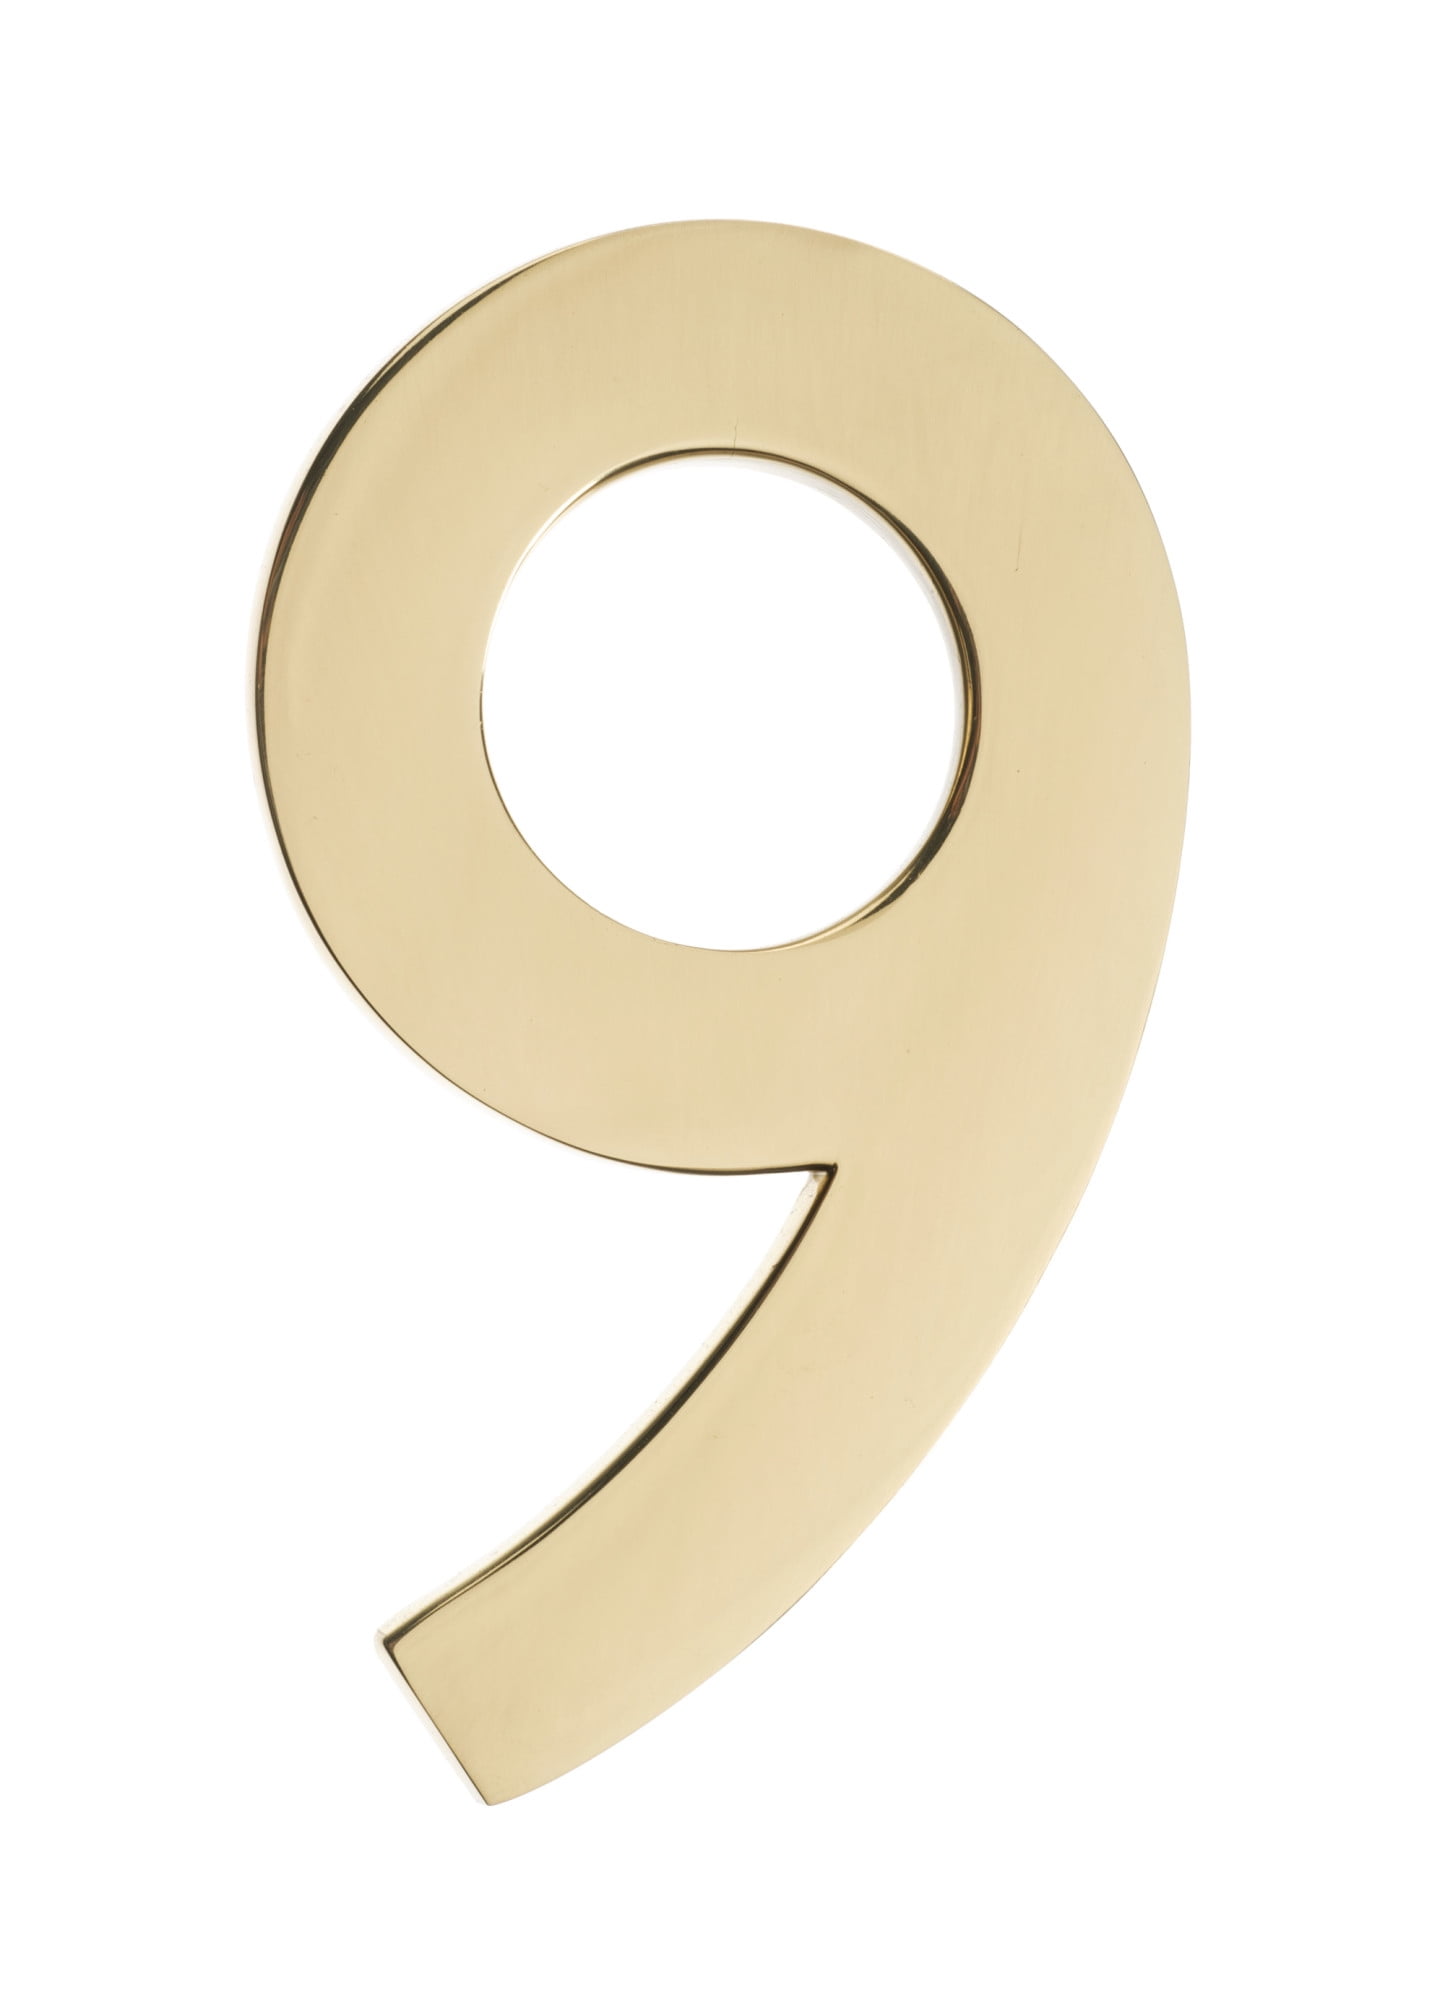 3582pb-9 Floating House Number 9, Polished Brass - 4 In.